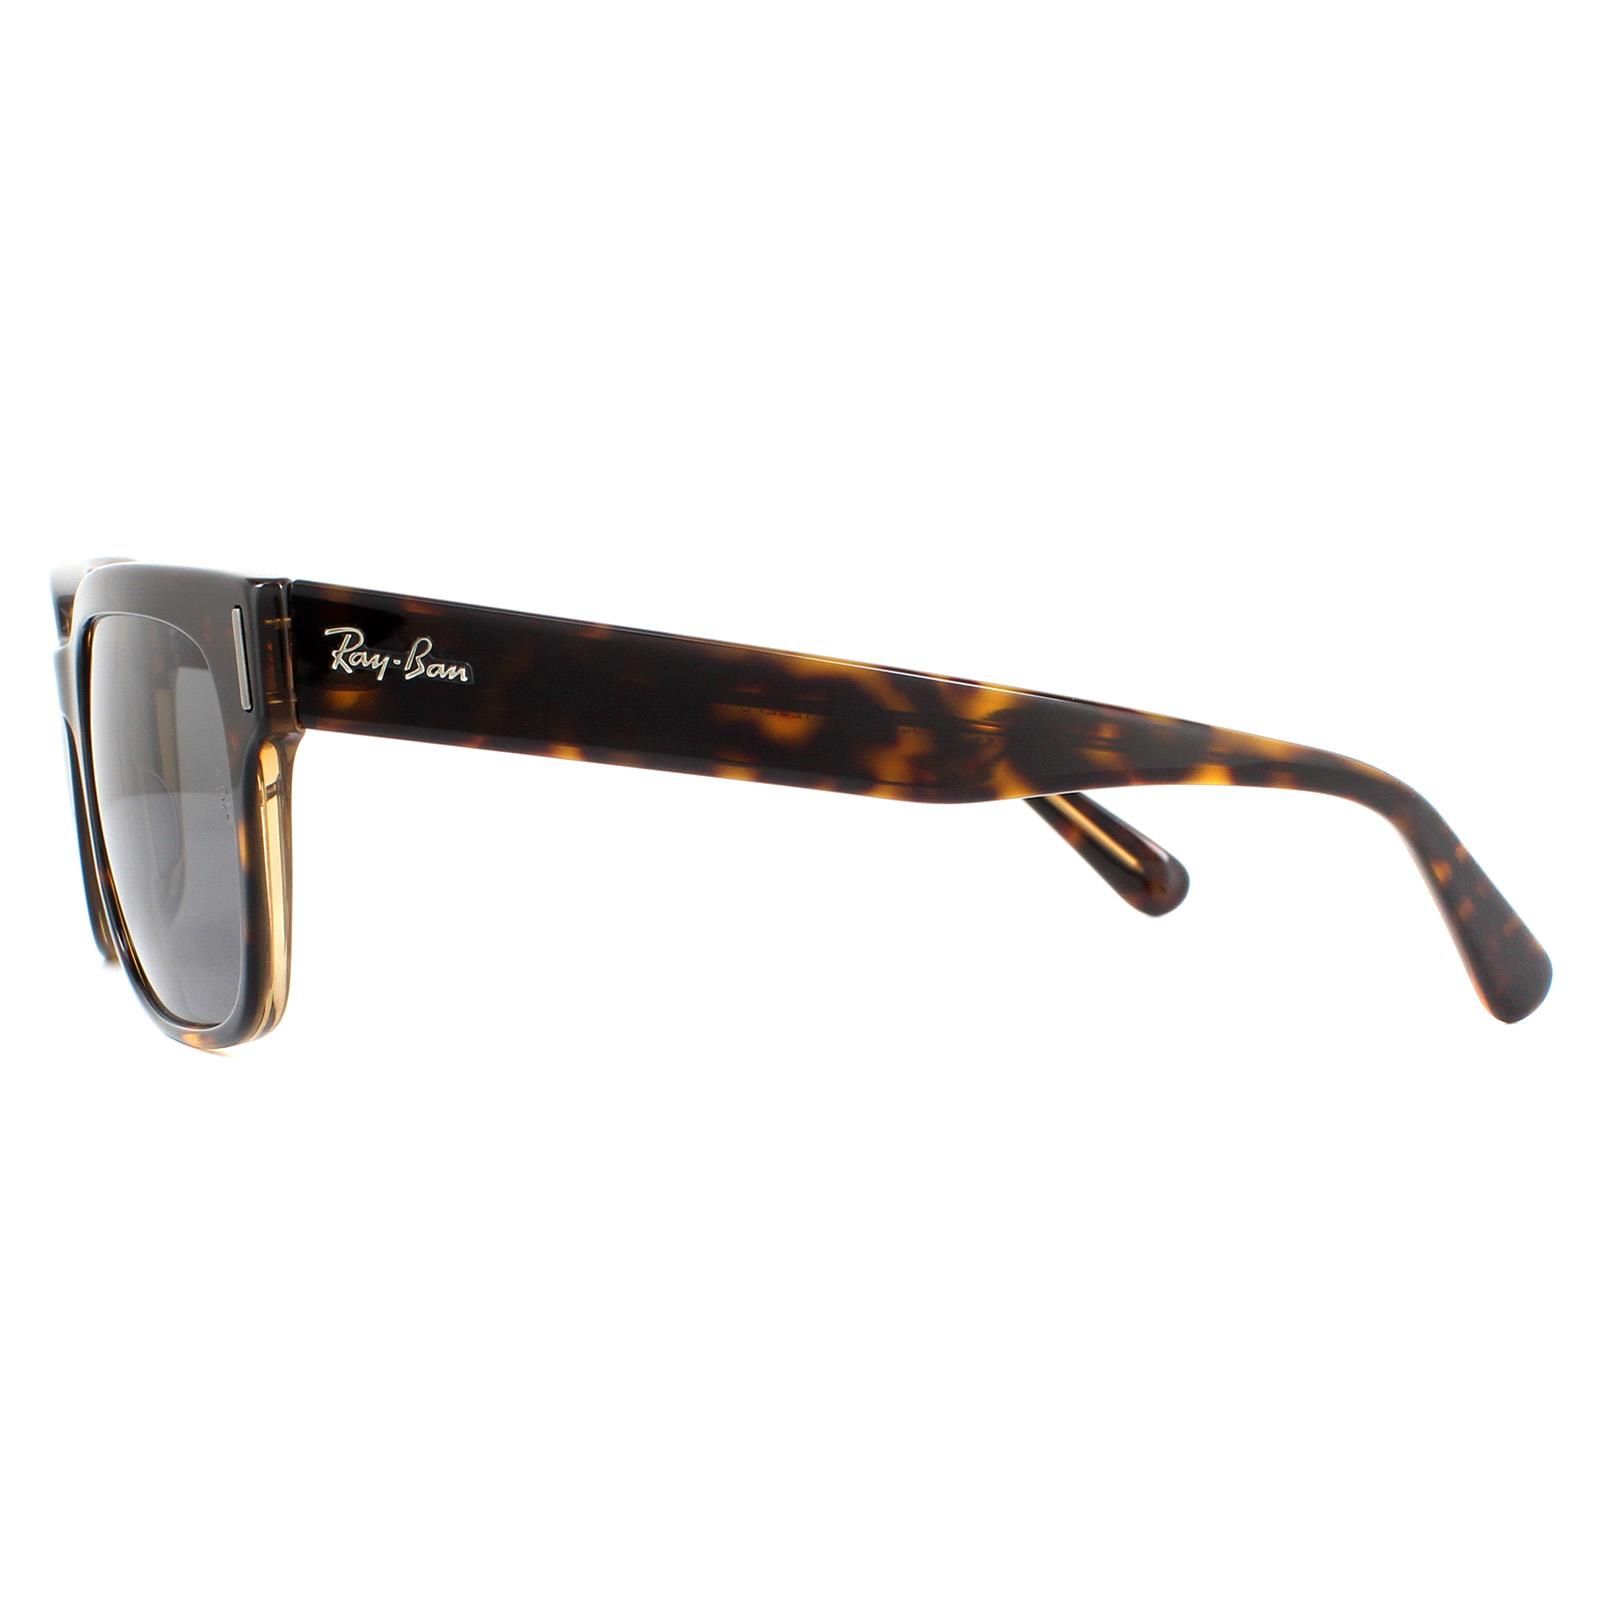 Ray-Ban Sunglasses Jeffrey RB2190 1292B1 Tortoise Dark Grey are a square shaped frame made from lightweight acetate. The Ray-Ban logo features on the corner of the lens in addition to the distinctive thick temples for authenticity